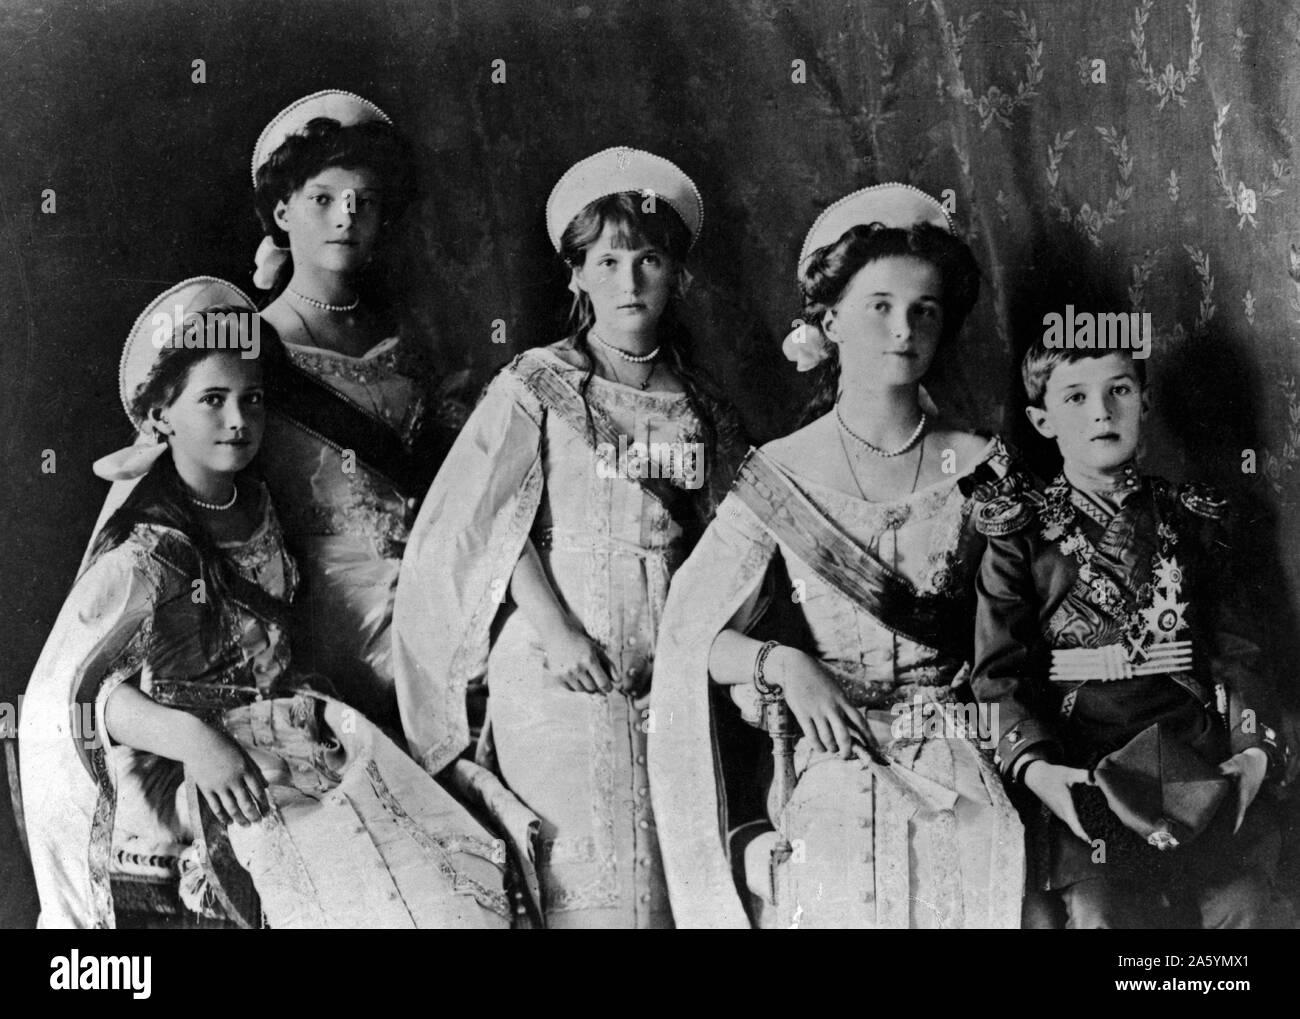 Photograph of the Romanov Children from the Russian Royal family taken in the early 1900's. Showing Olga, Tatiana, Maria, Anastasia and Aleksei posing together for an official portrait. Stock Photo